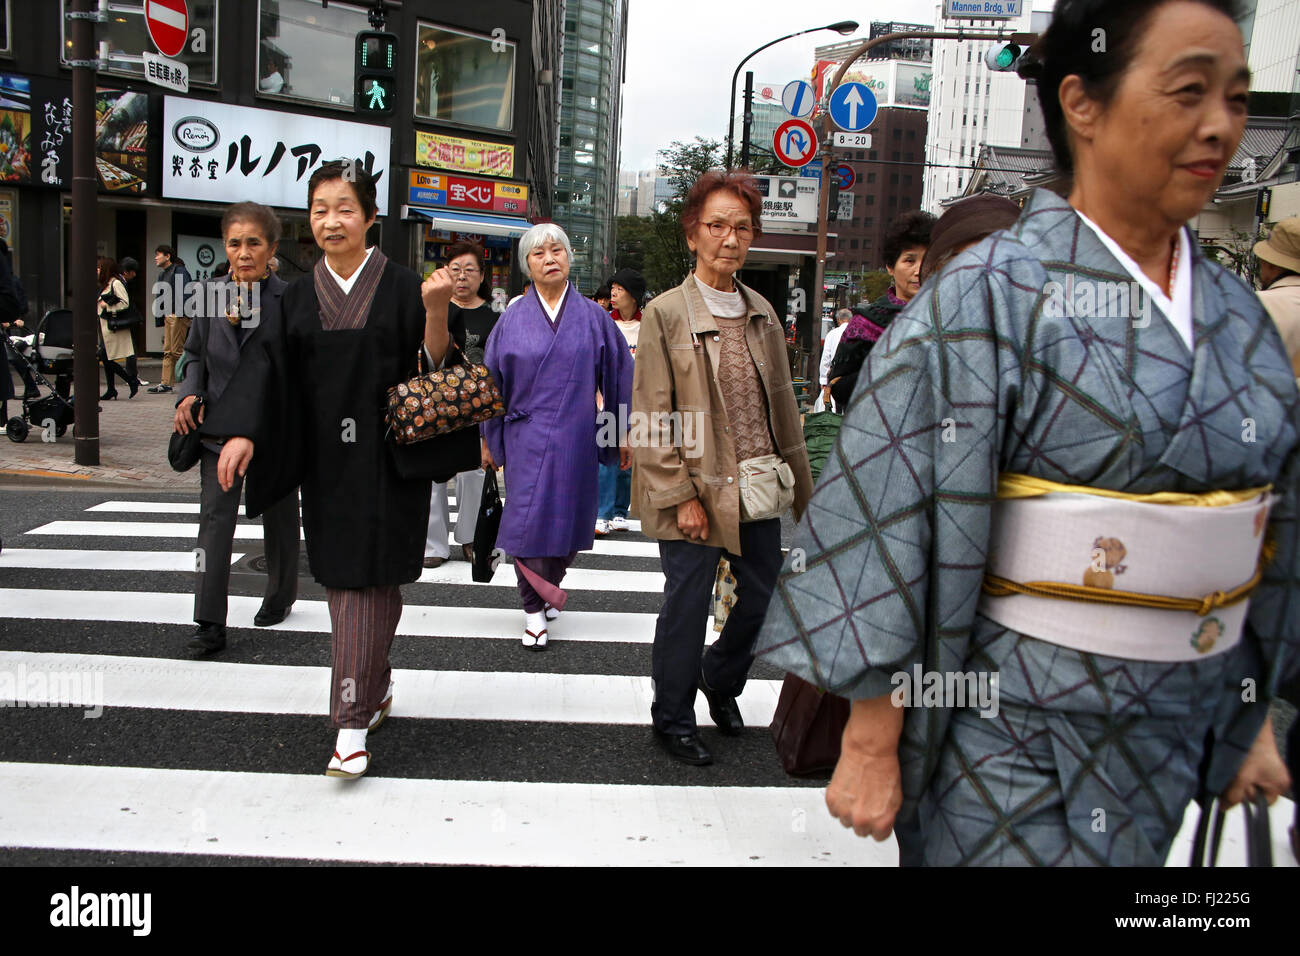 People in a street of Tokyo, Japan Stock Photo